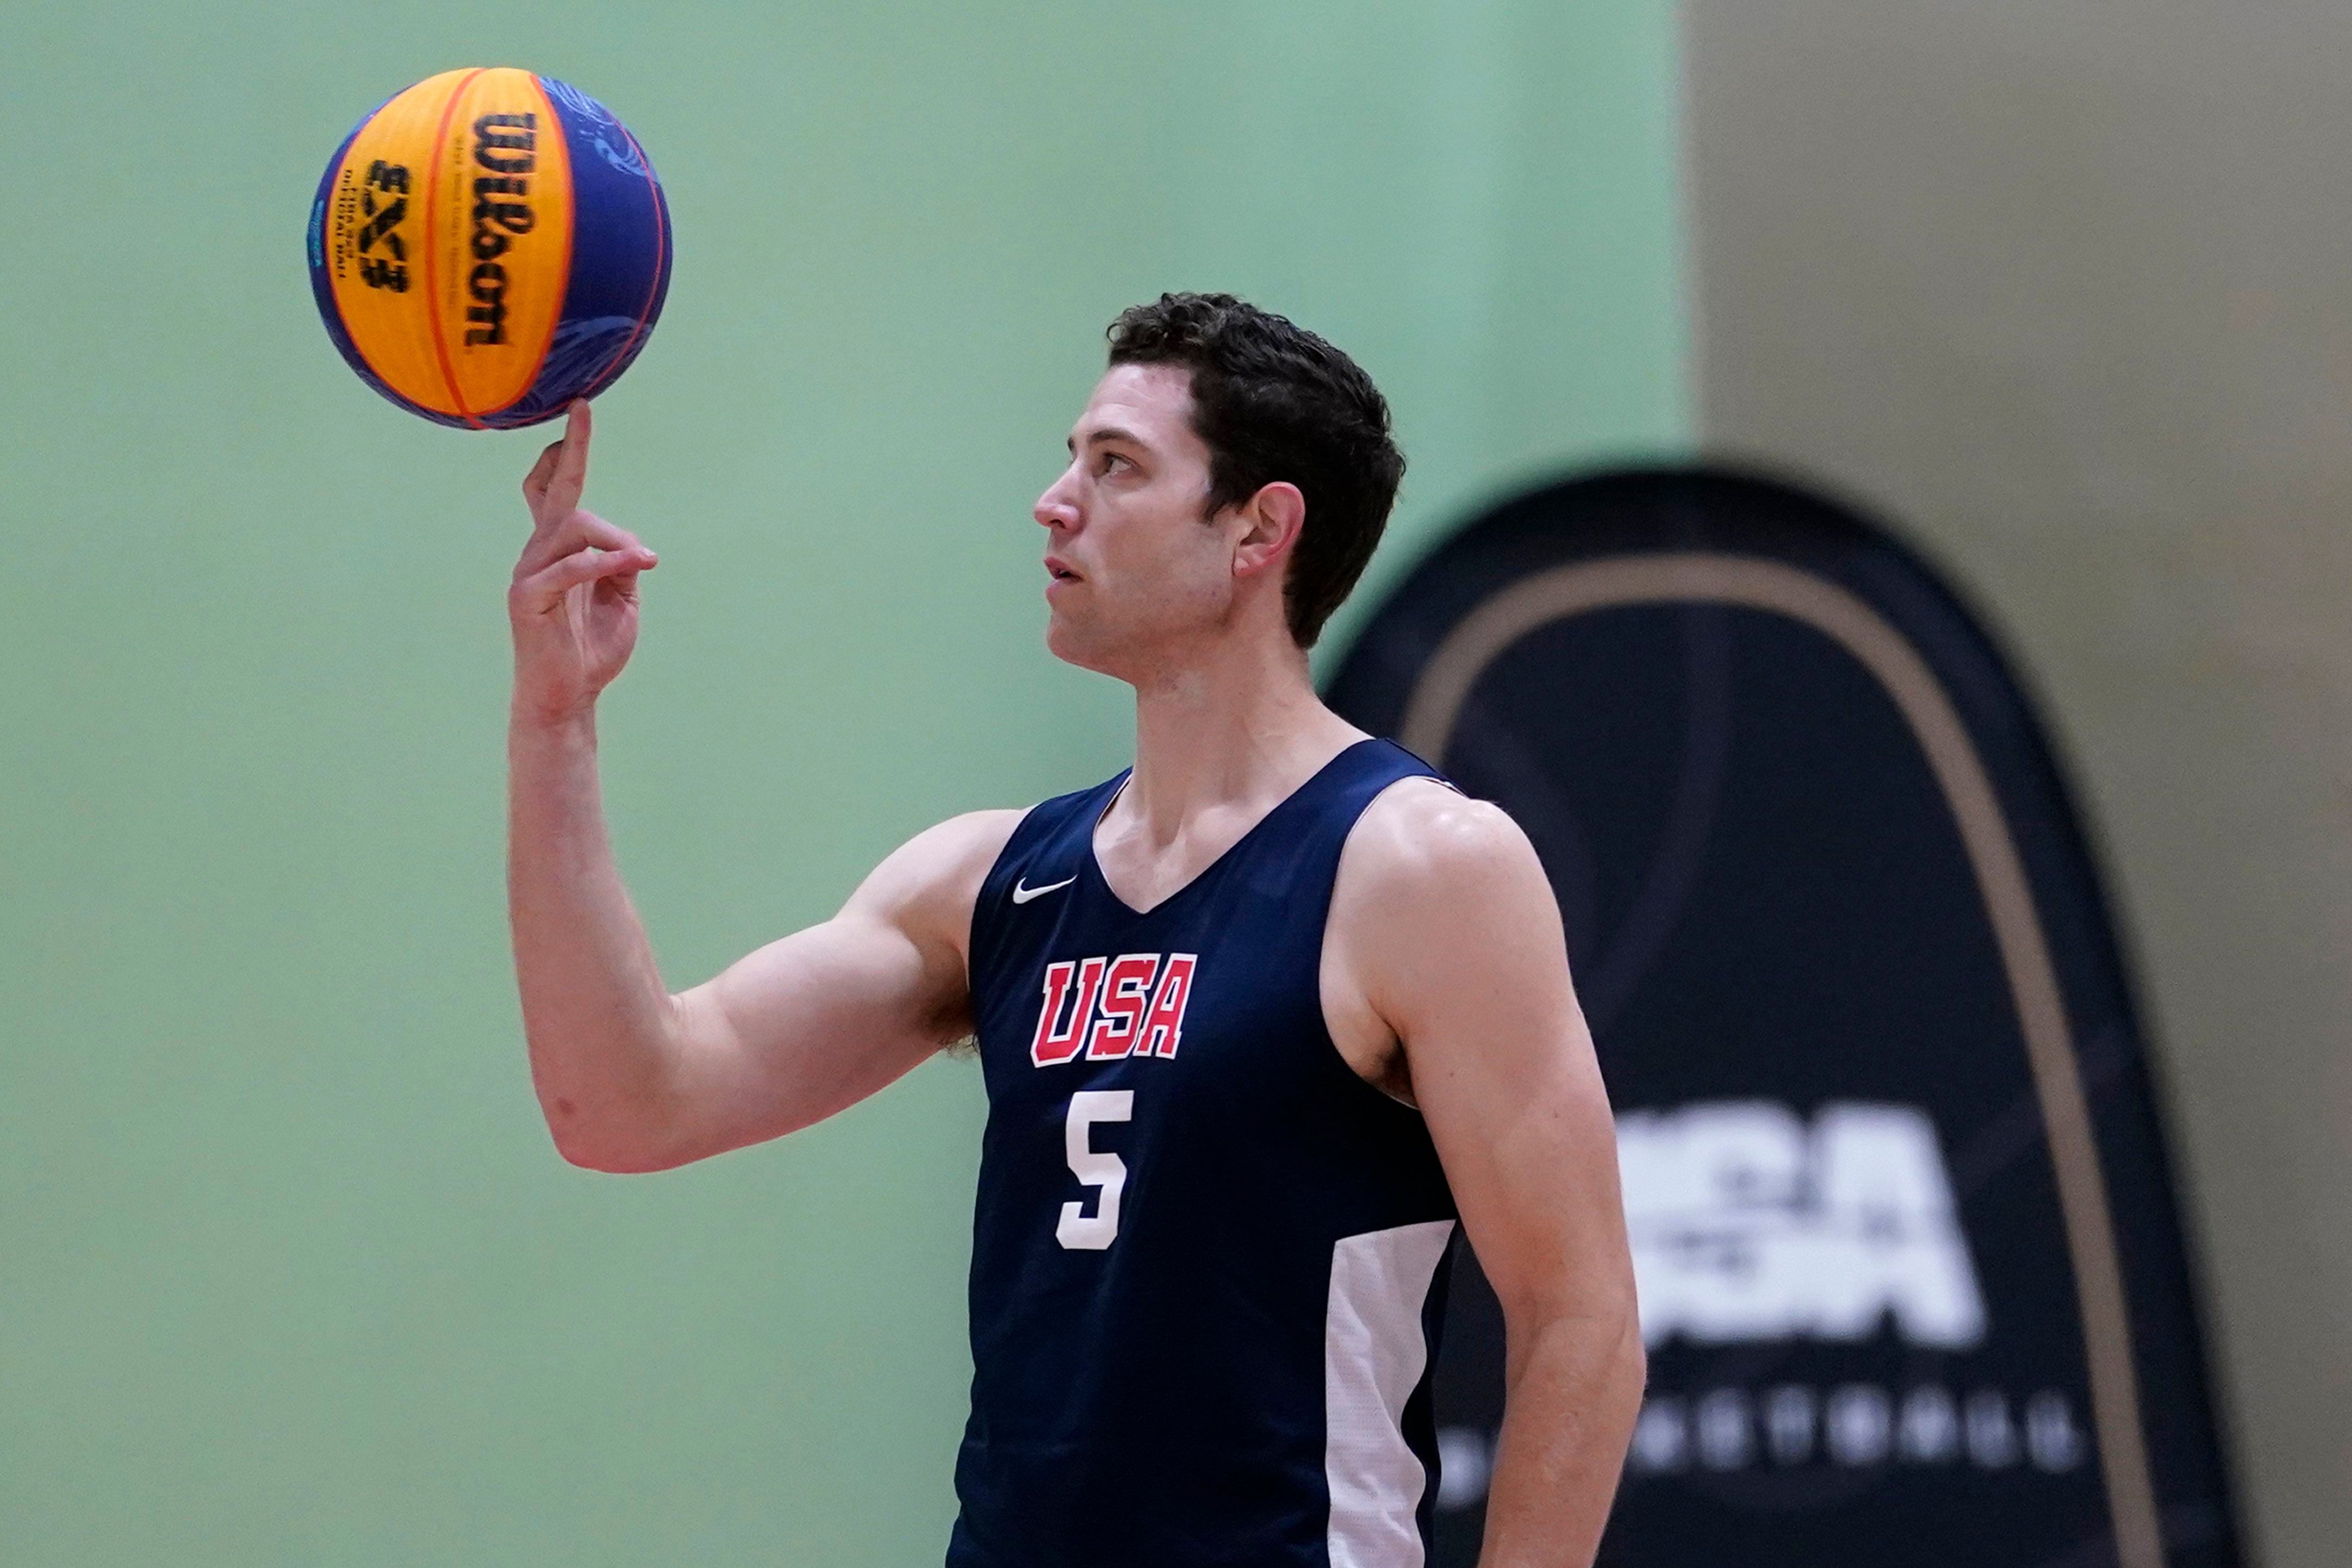 Former BYU Star Helps USA Win Silver At FIBA 3x3 World Cup